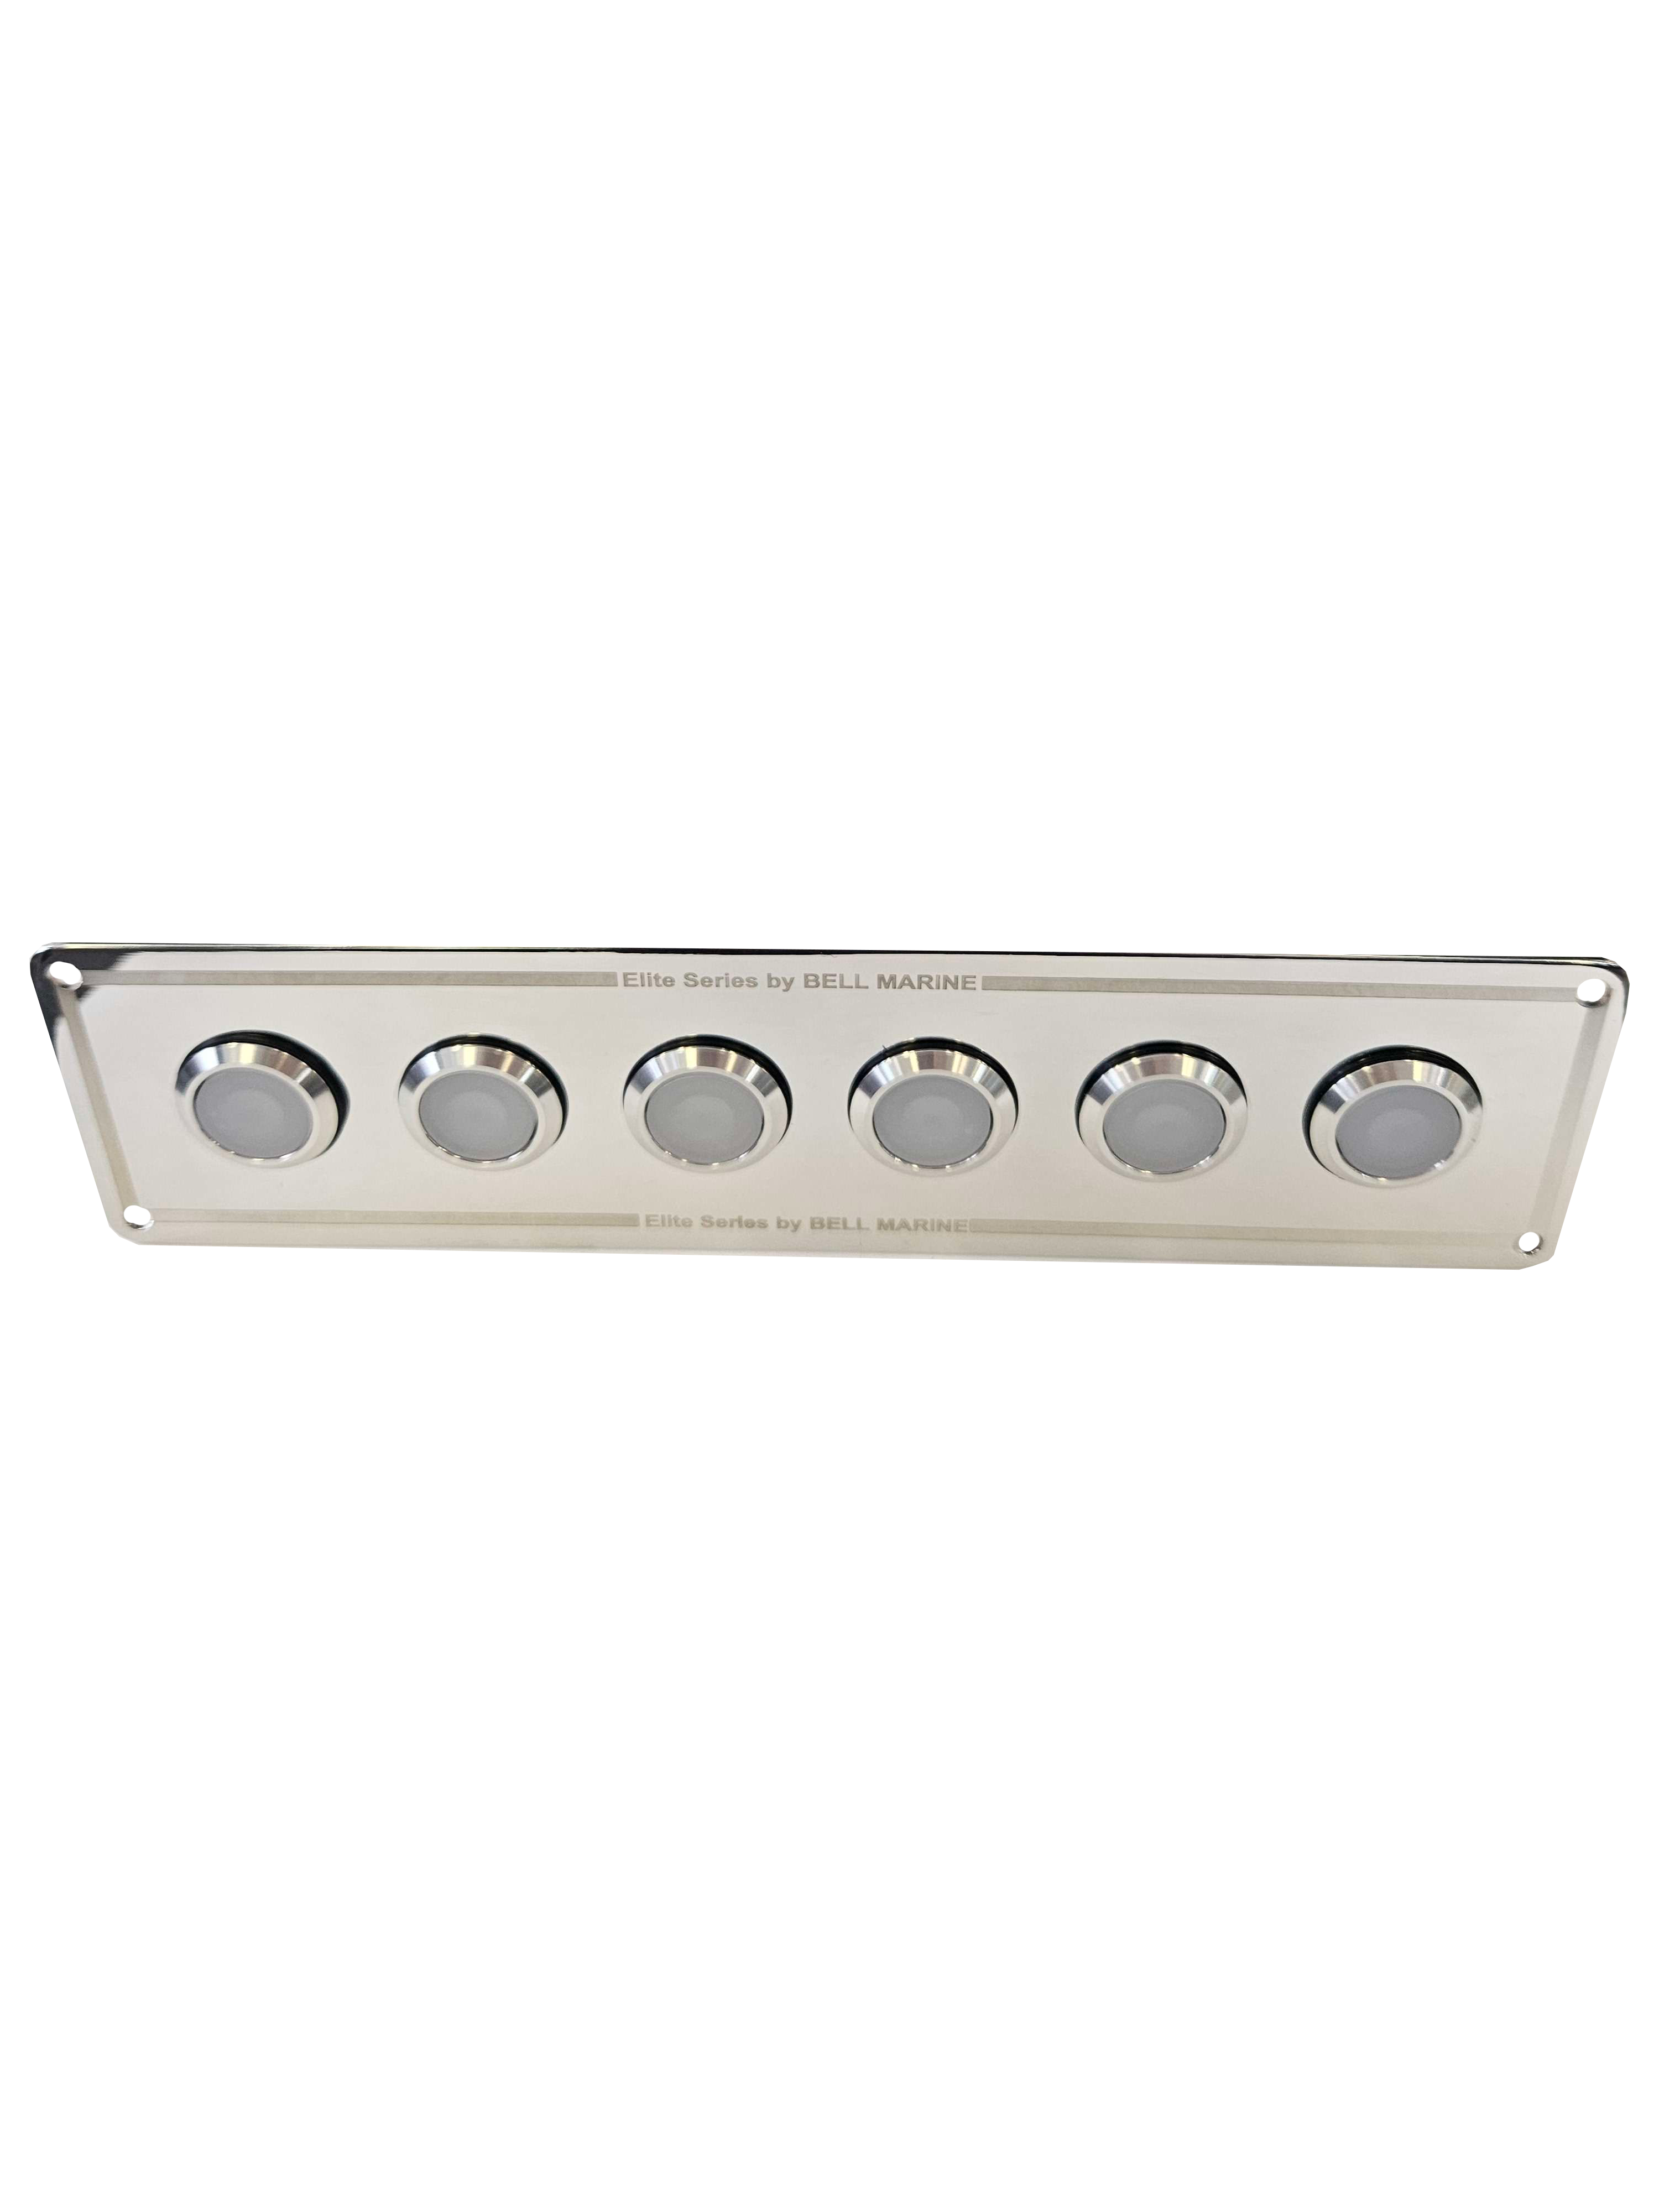 6 gang INLINE stainless steel switch panel with 20A backlit switches